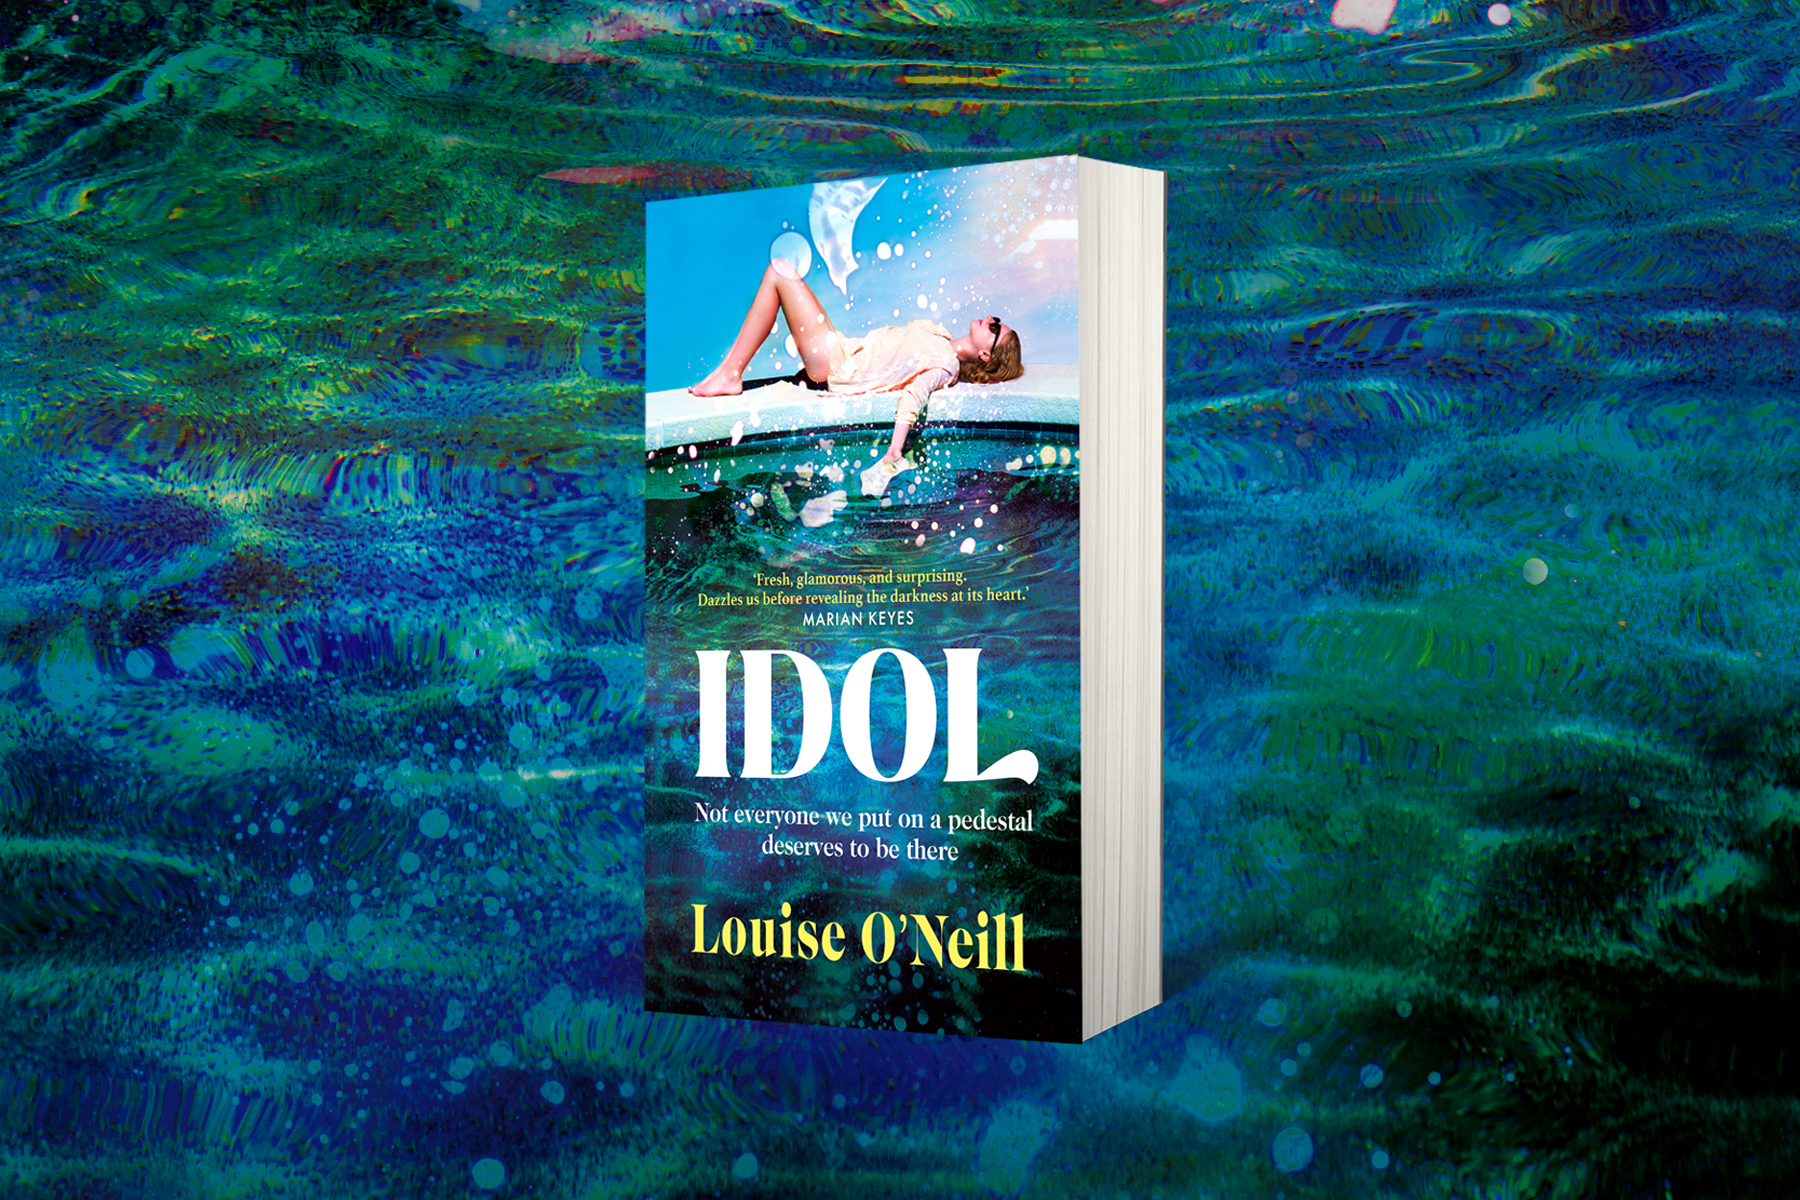 The novel Idol by Louise O'Neill, shot against a blue-green aquatic background